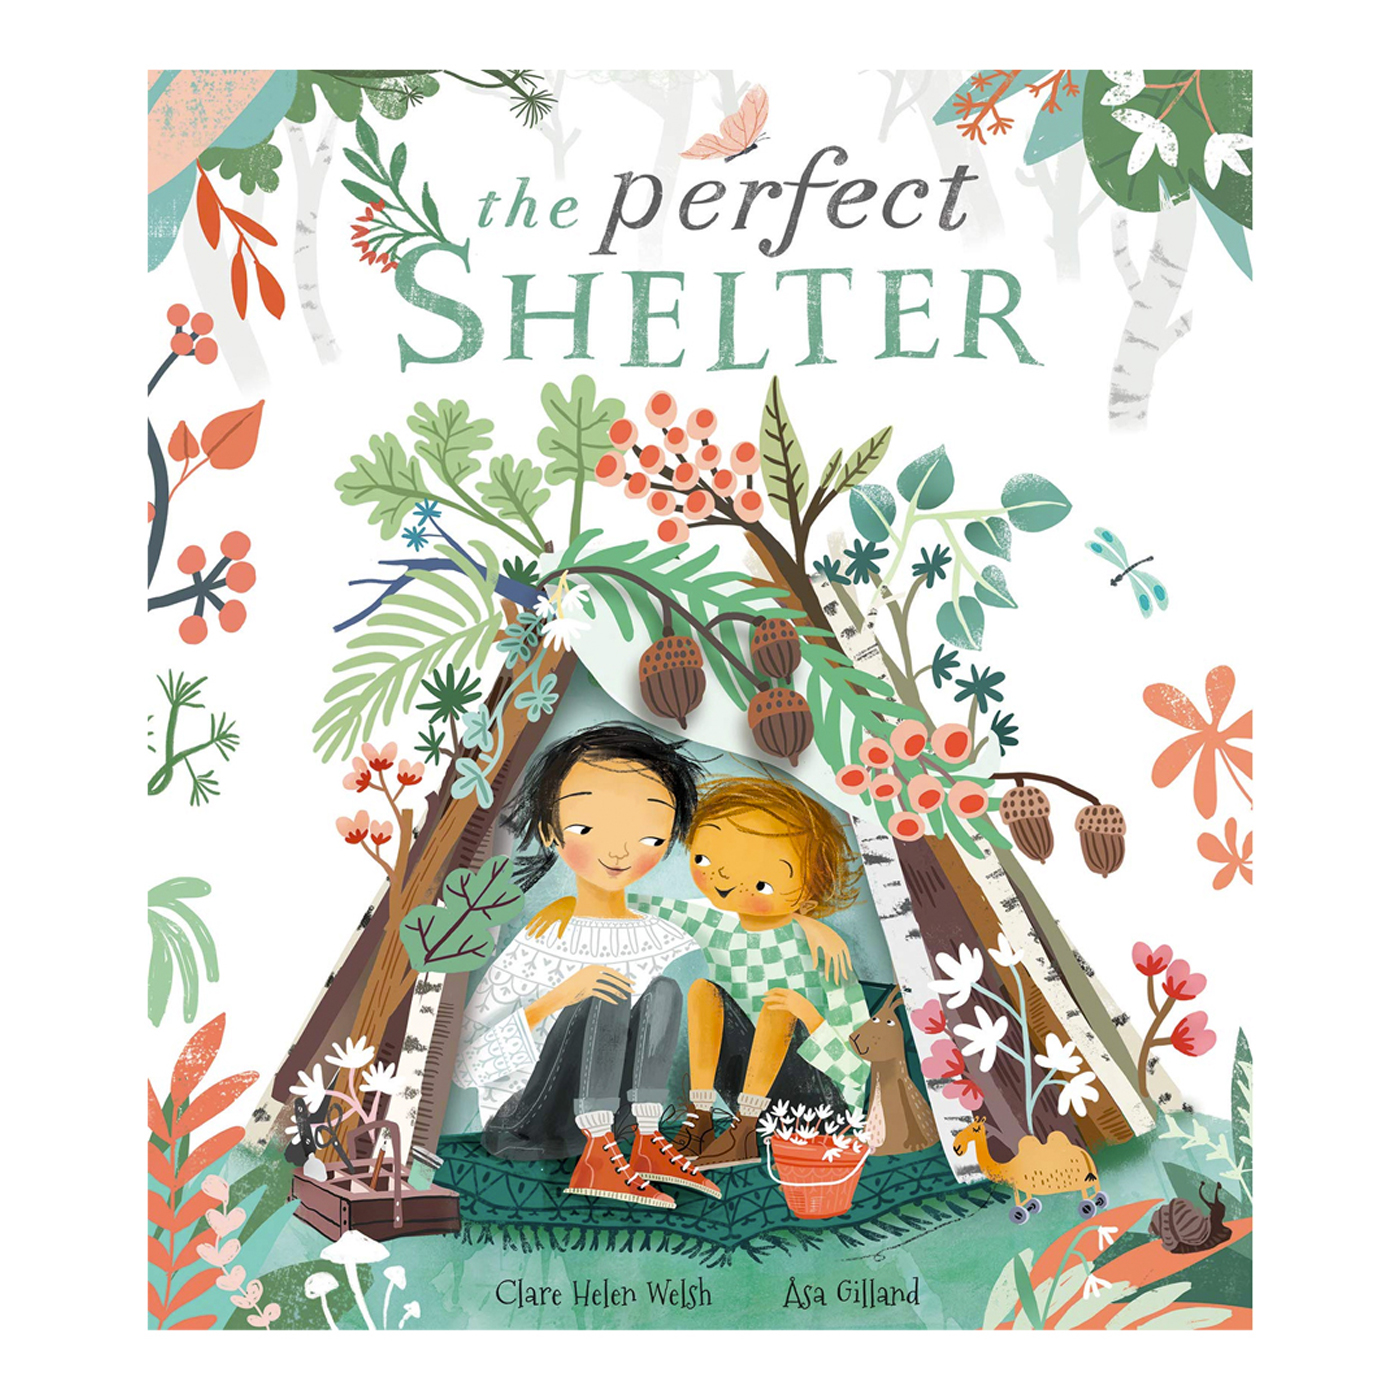  The Perfect Shelter